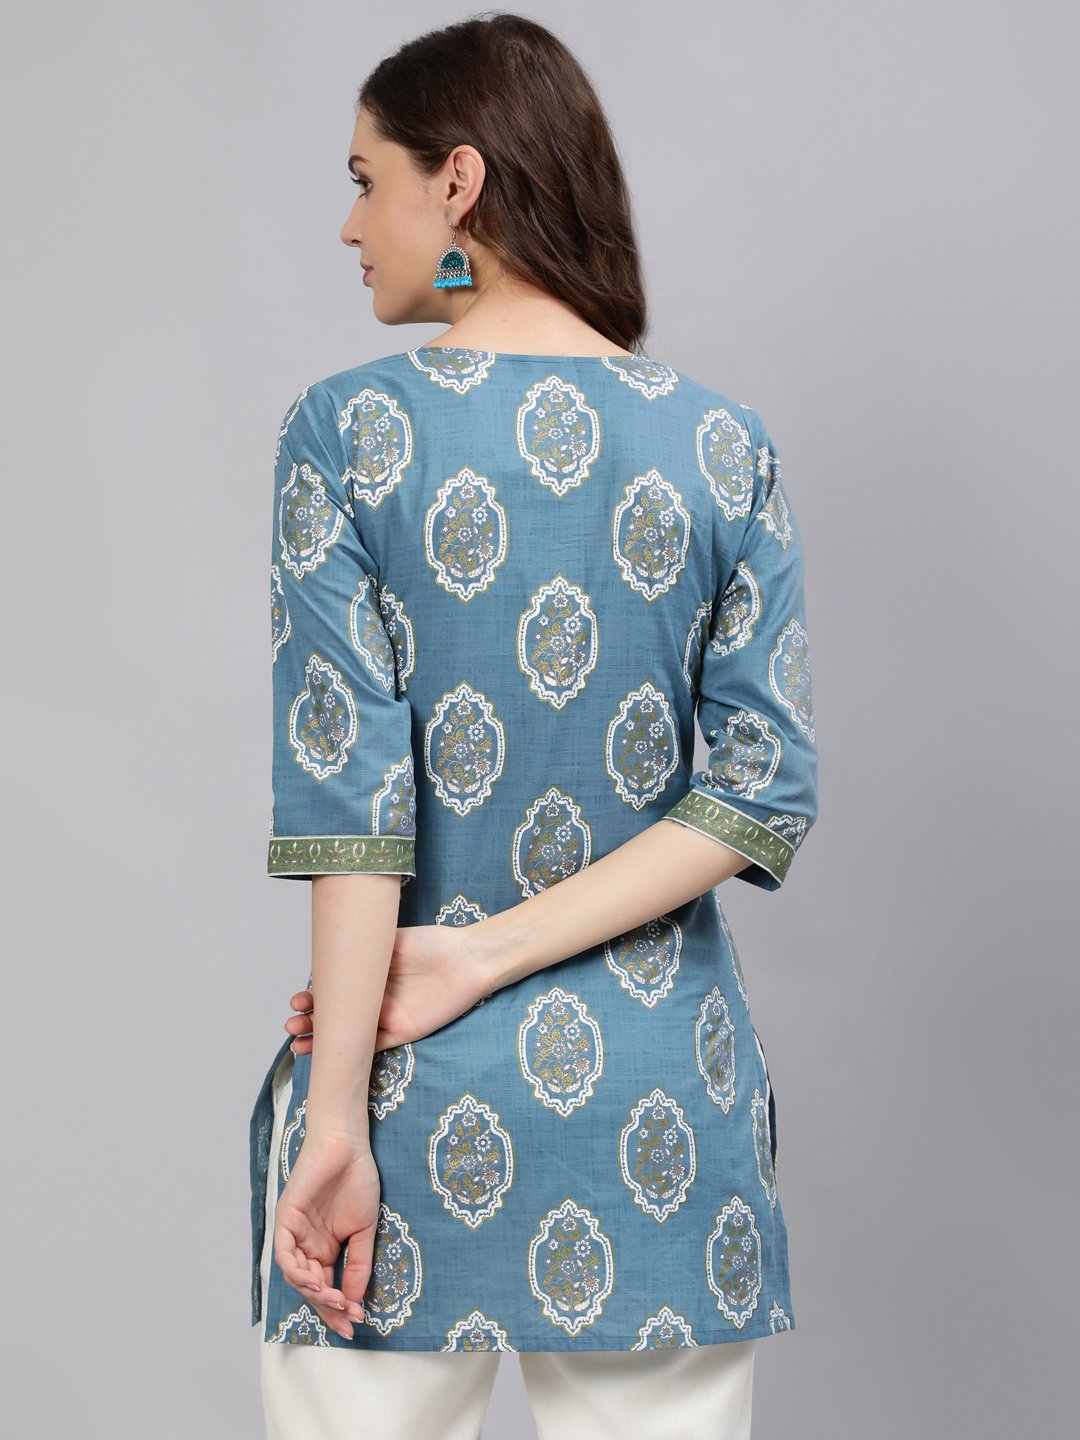 Women's Blue & Gold Printed Tunic With Three Quarter Sleeves - Nayo Clothing